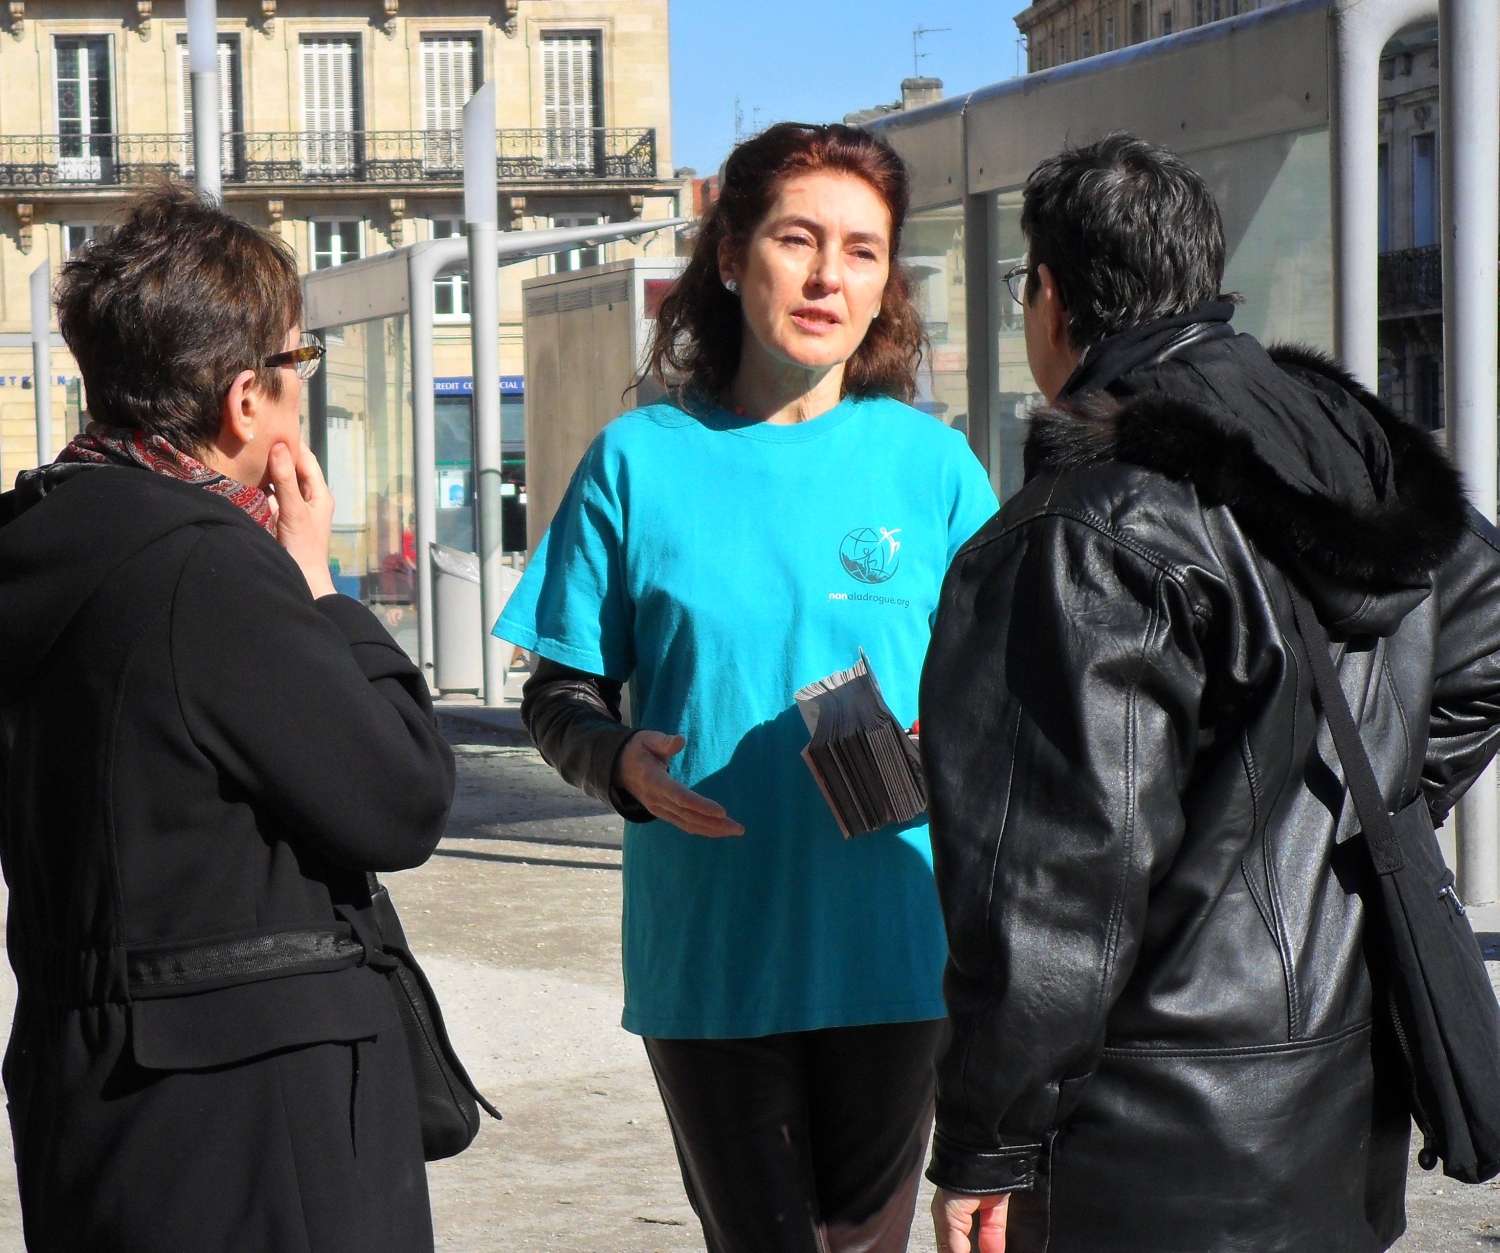 Scientologist from Bordeaux engages people in a discussion on the importance of drug education.